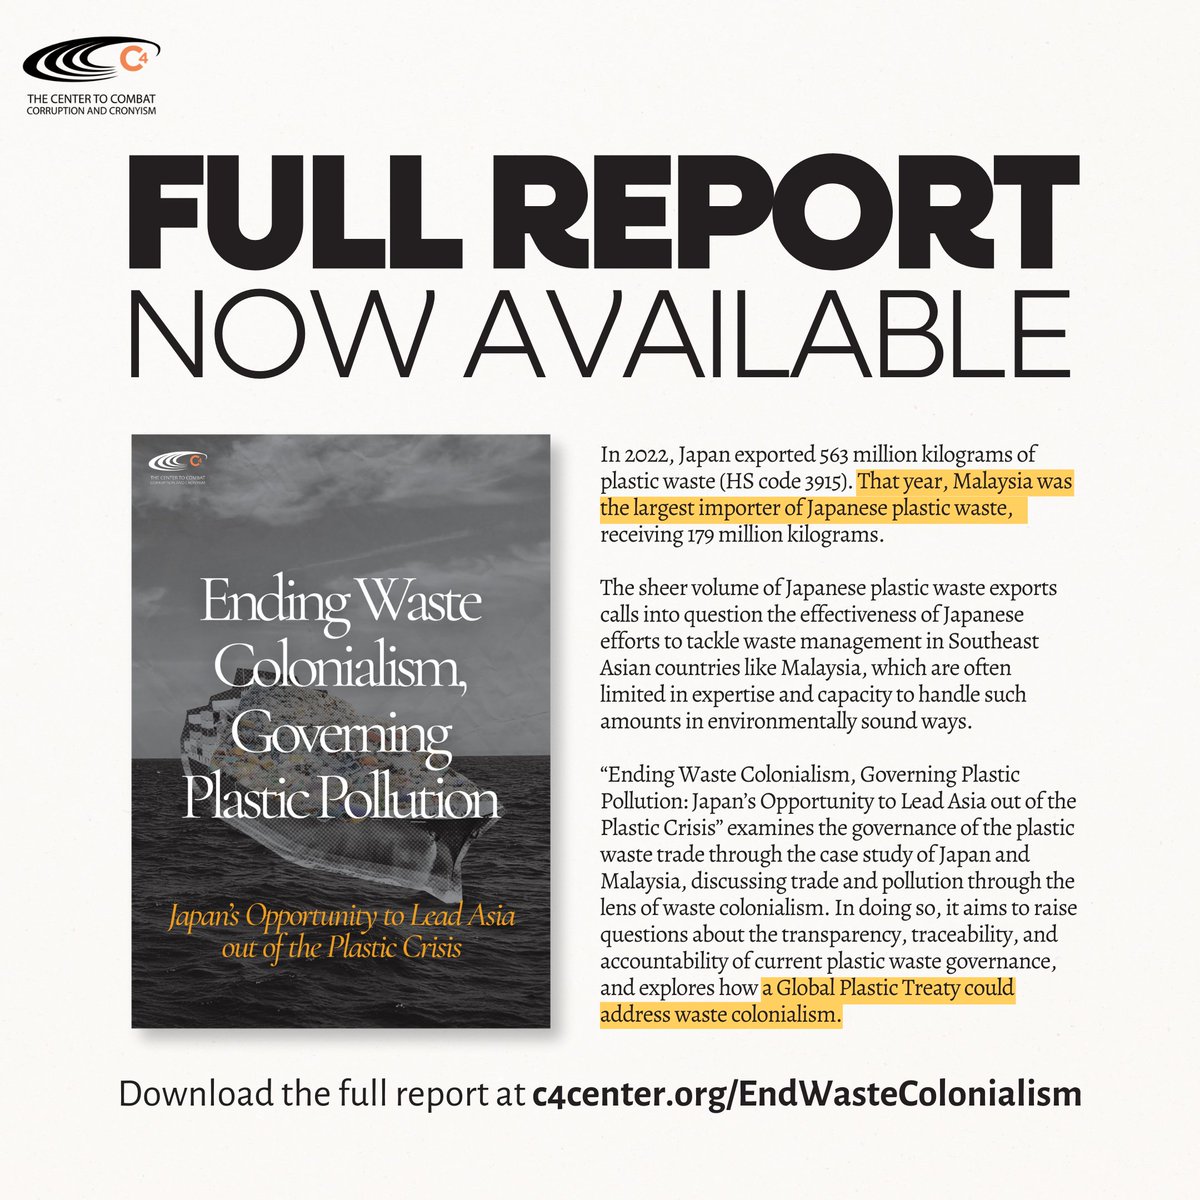 Our new report discusses trade and pollution through the lens of waste colonialism, and raises questions about the transparency, traceability, and accountability of waste governance frameworks. 
The full report is available for download on our website at c4center.org/EndWasteColoni…